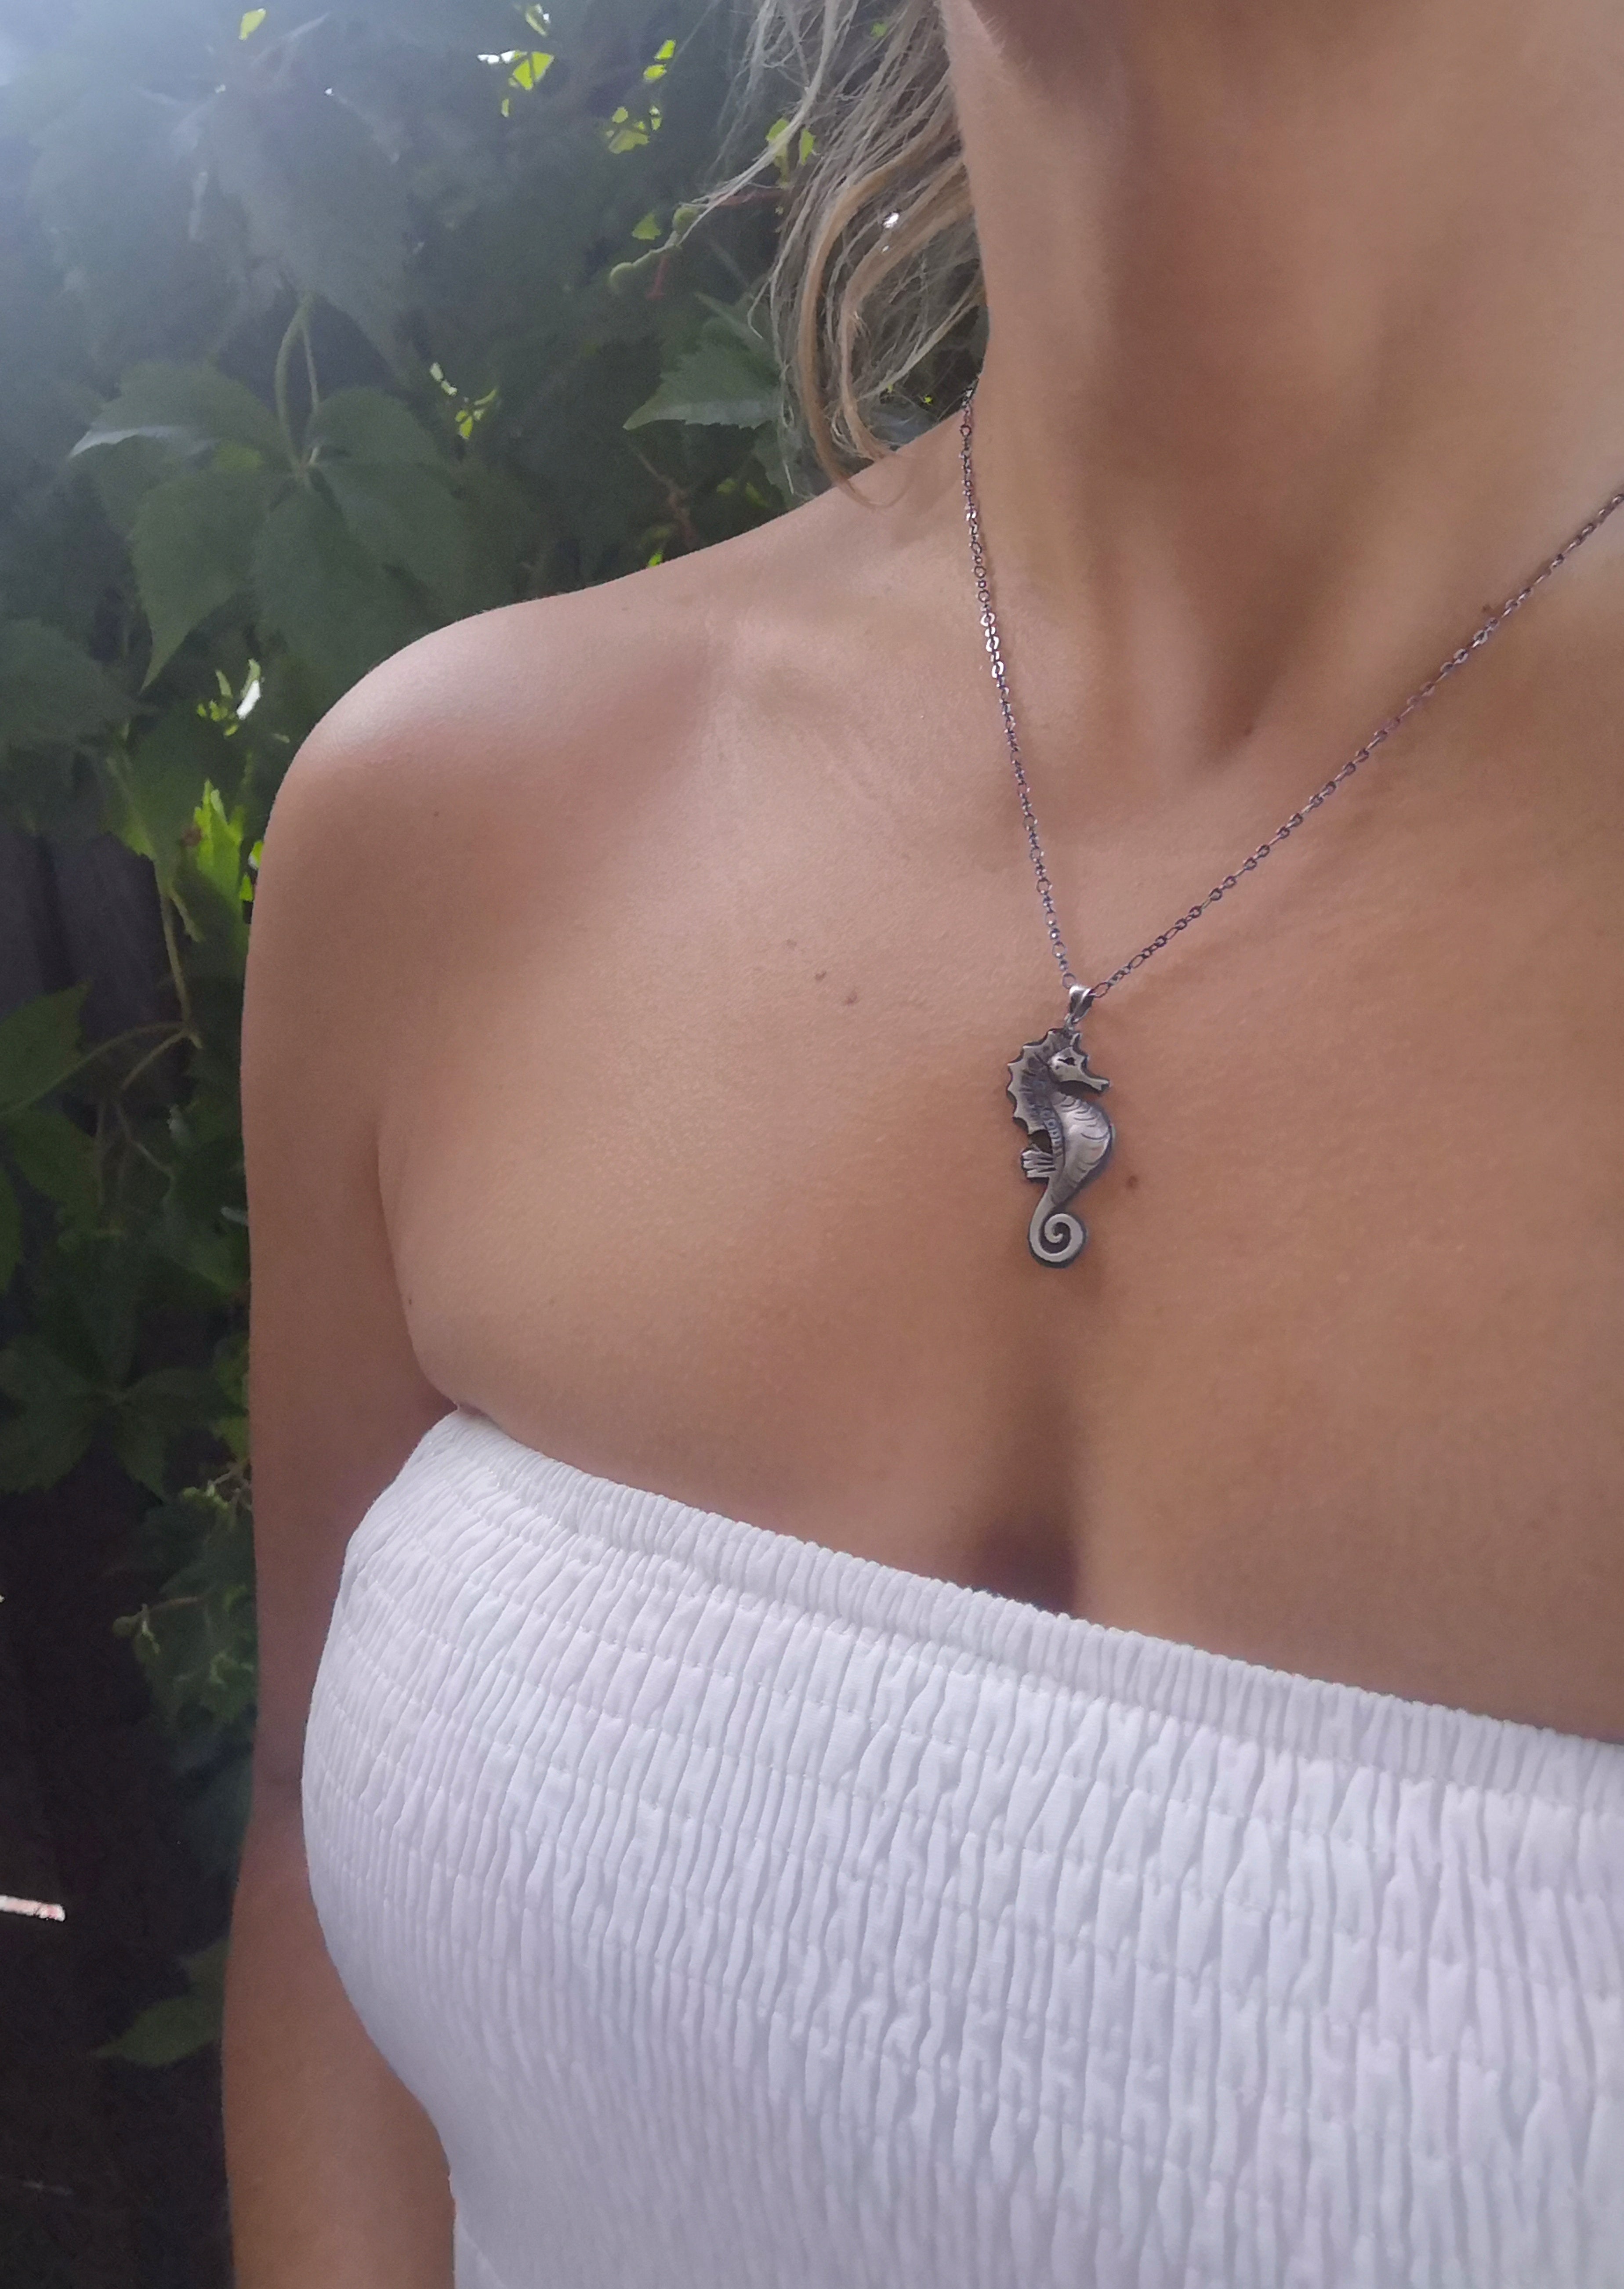 The Seahorse Necklace